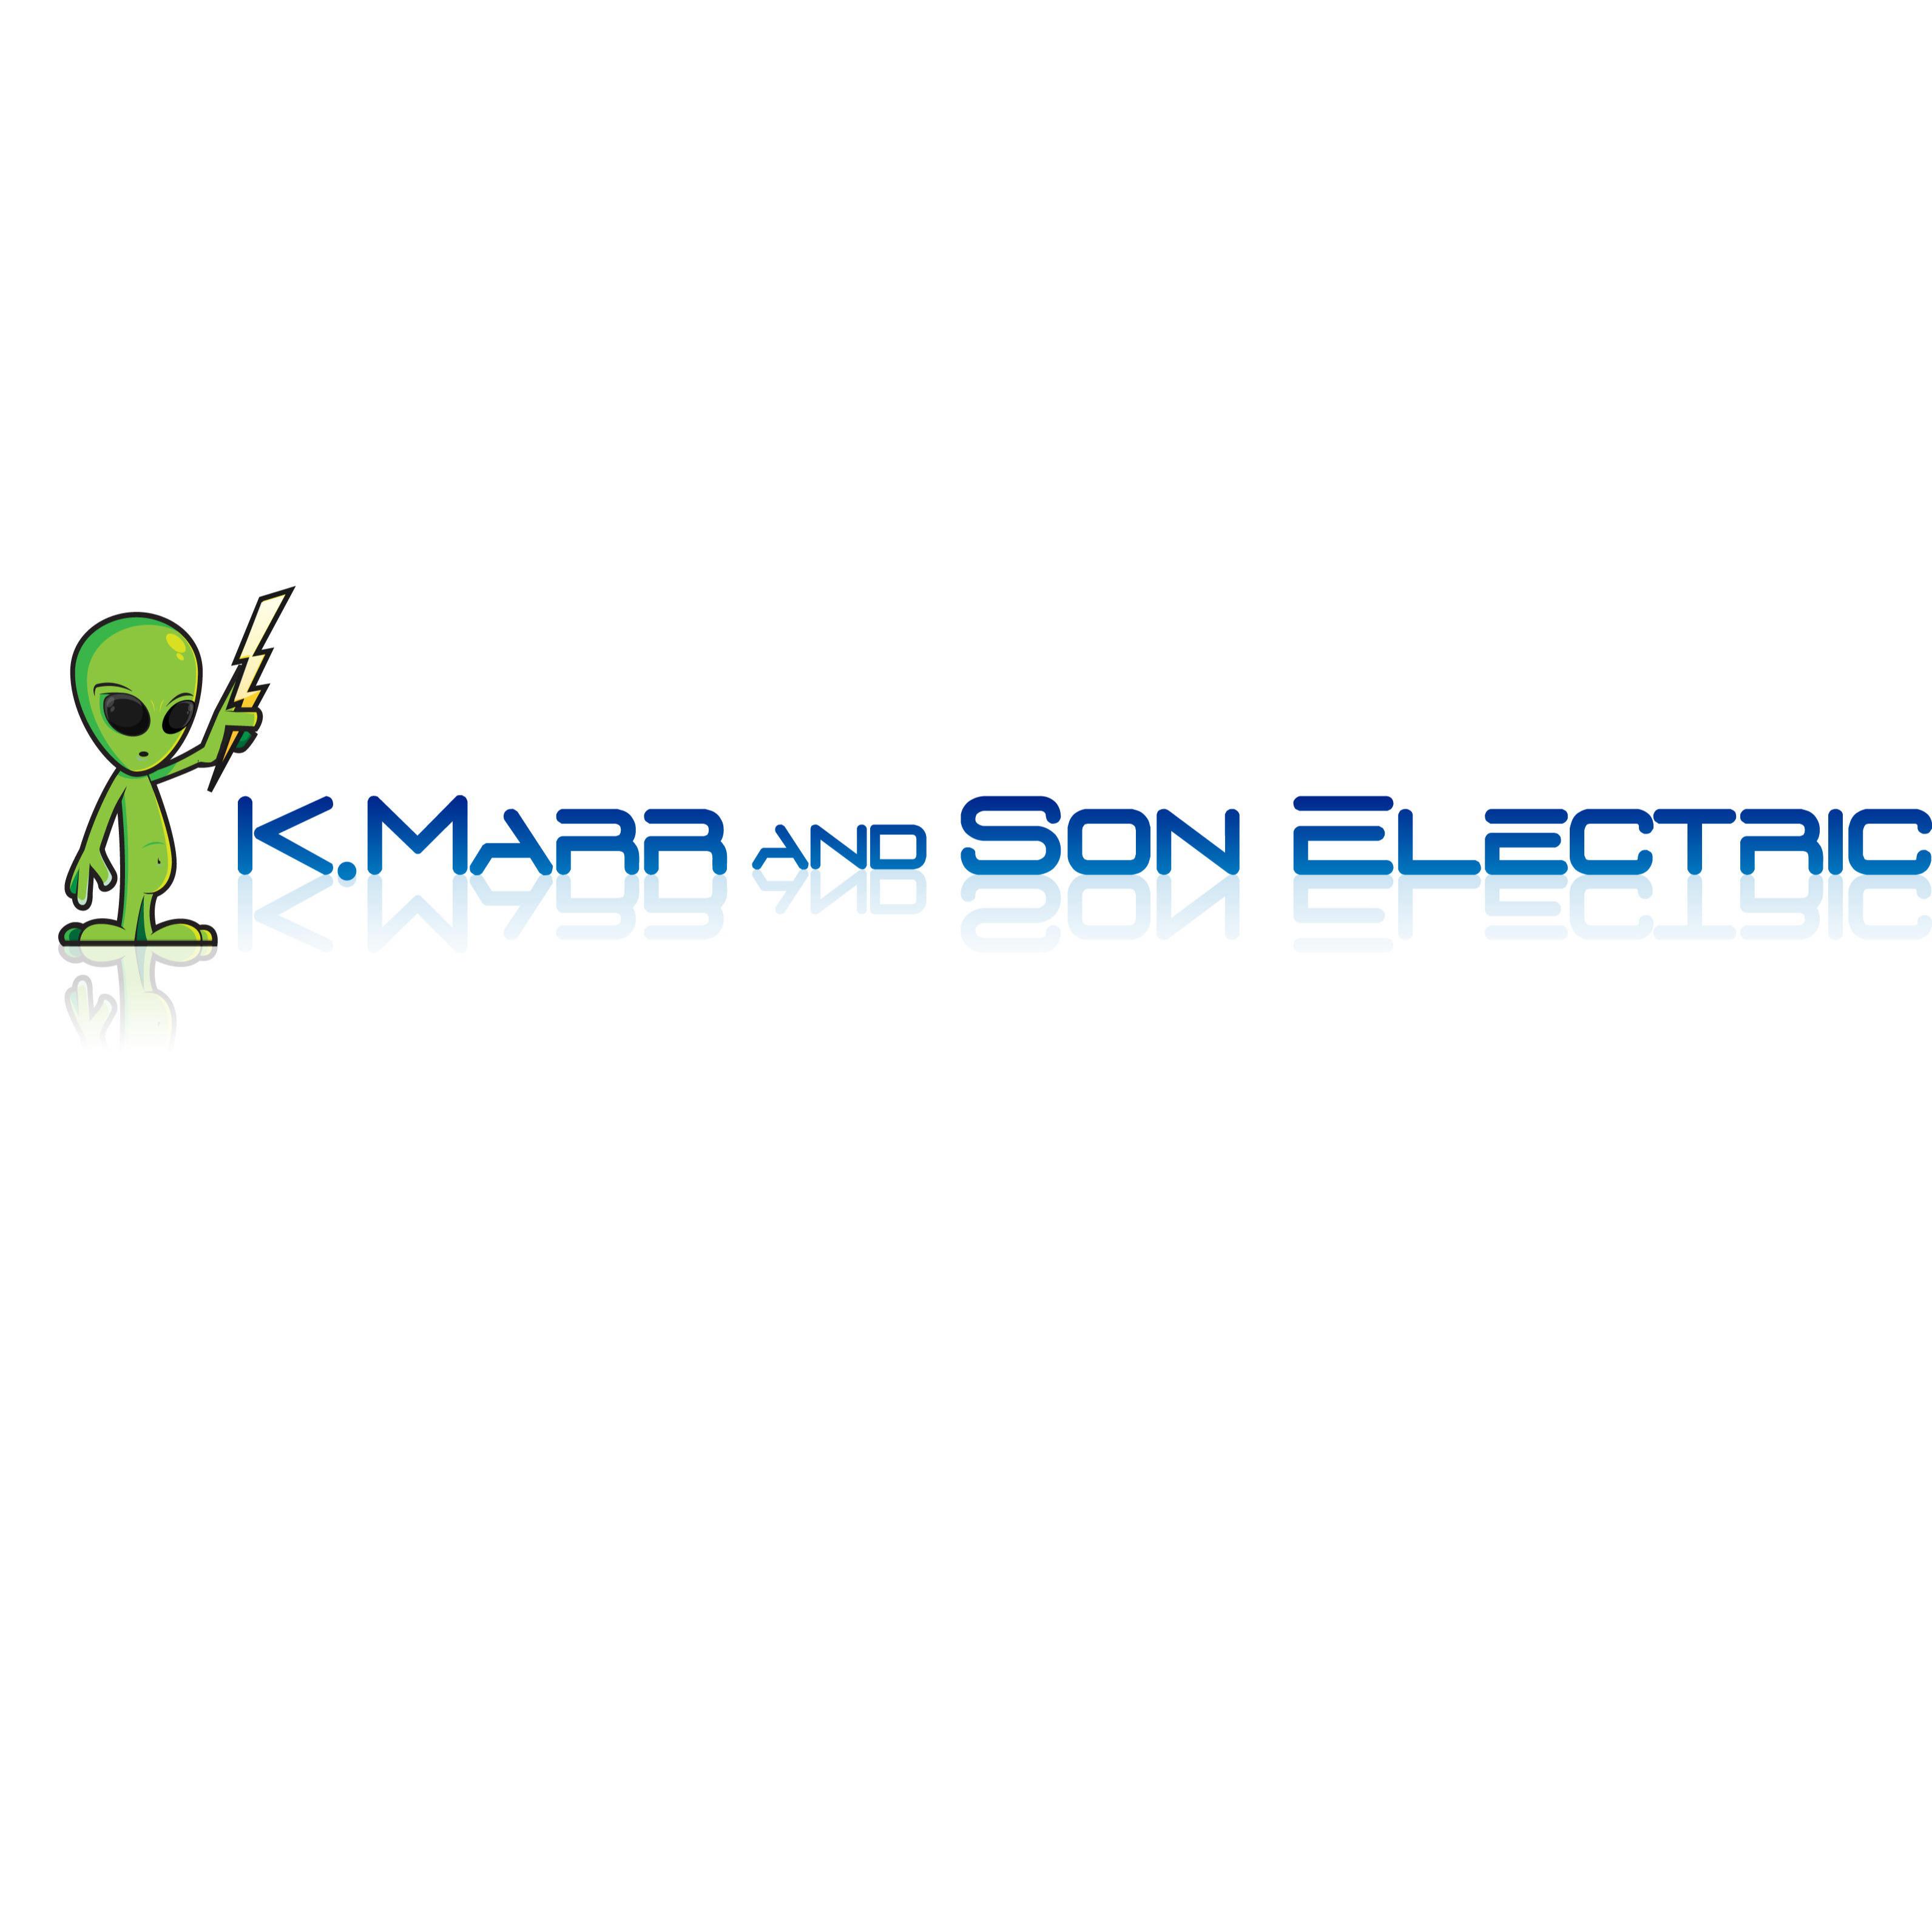 K.MARR AND SON ELECTRIC Logo